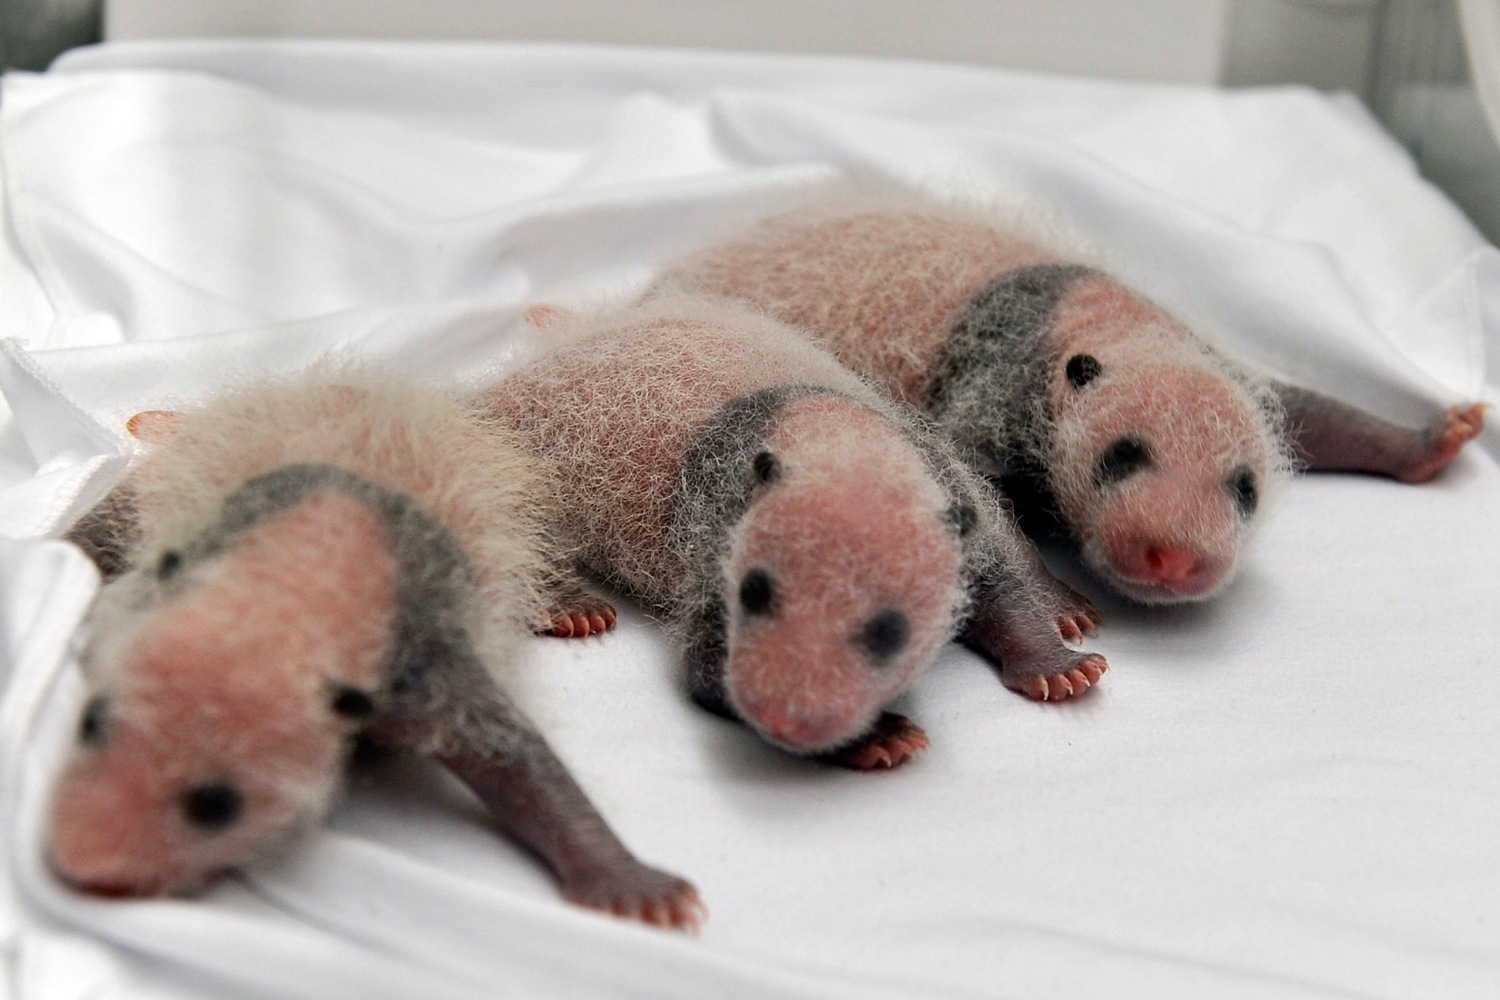 Triplet panda cubs rest in an incubator at the Chimelong Safari Park in Guangzhou in south China's Guangdong province, Aug. 12, 2014. (AP)